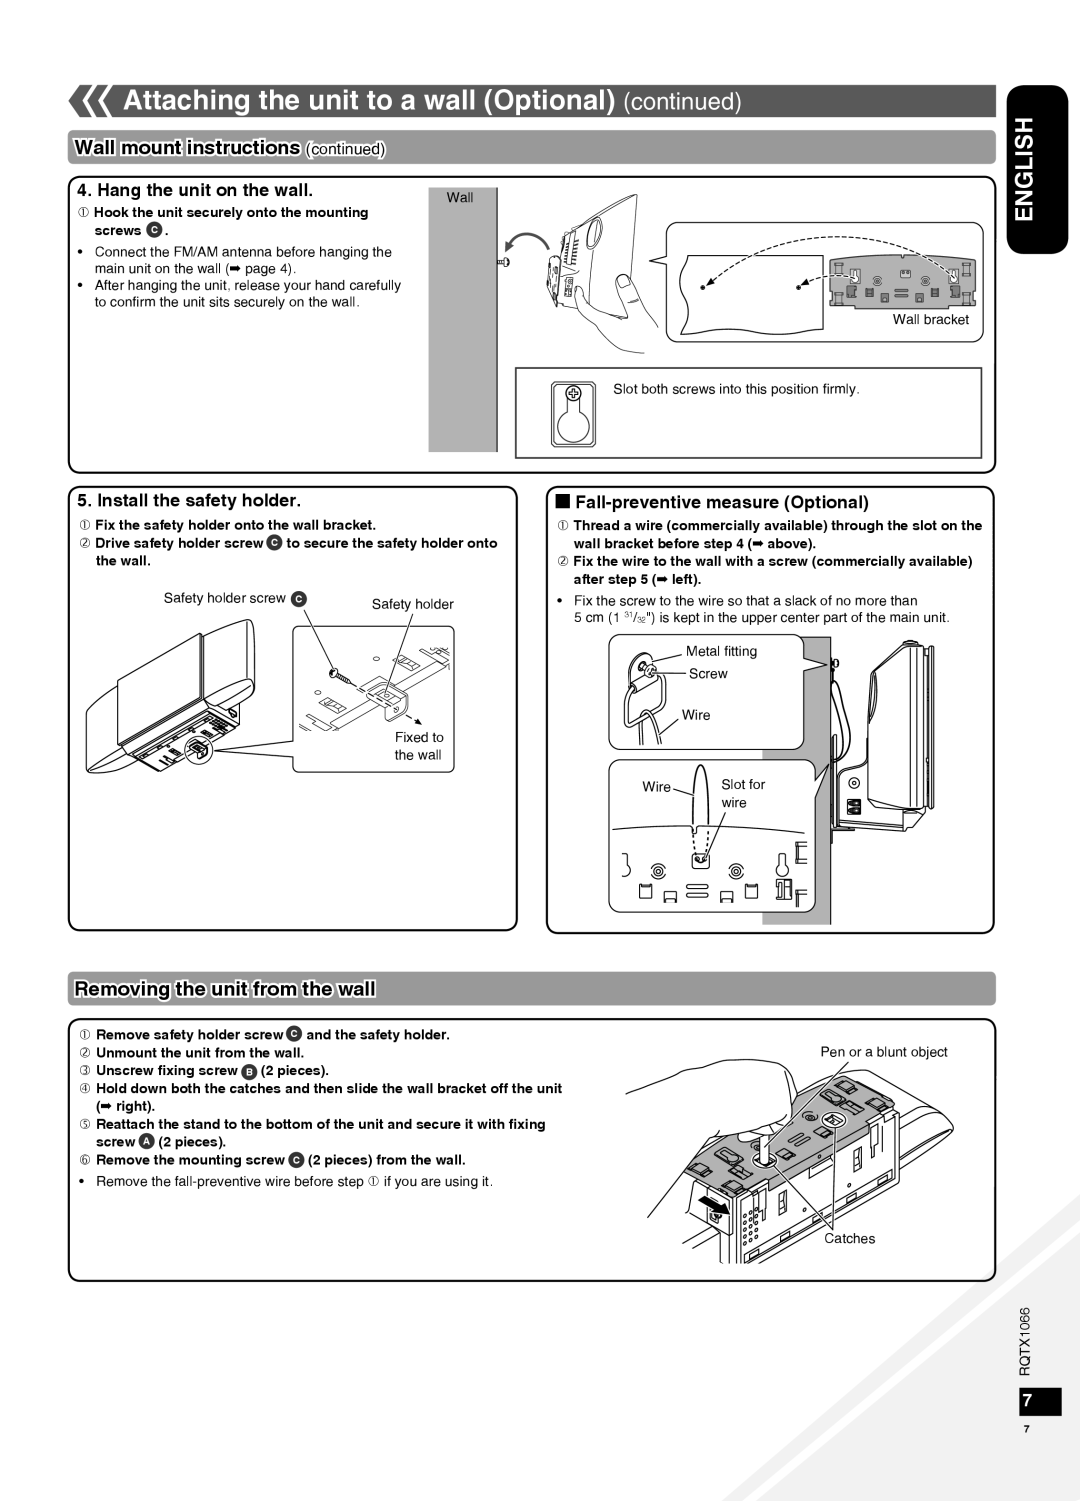 Panasonic SC-HC30 Wall mount instructions continued, Removing the unit from the wall, Hang the unit on the wall, English 